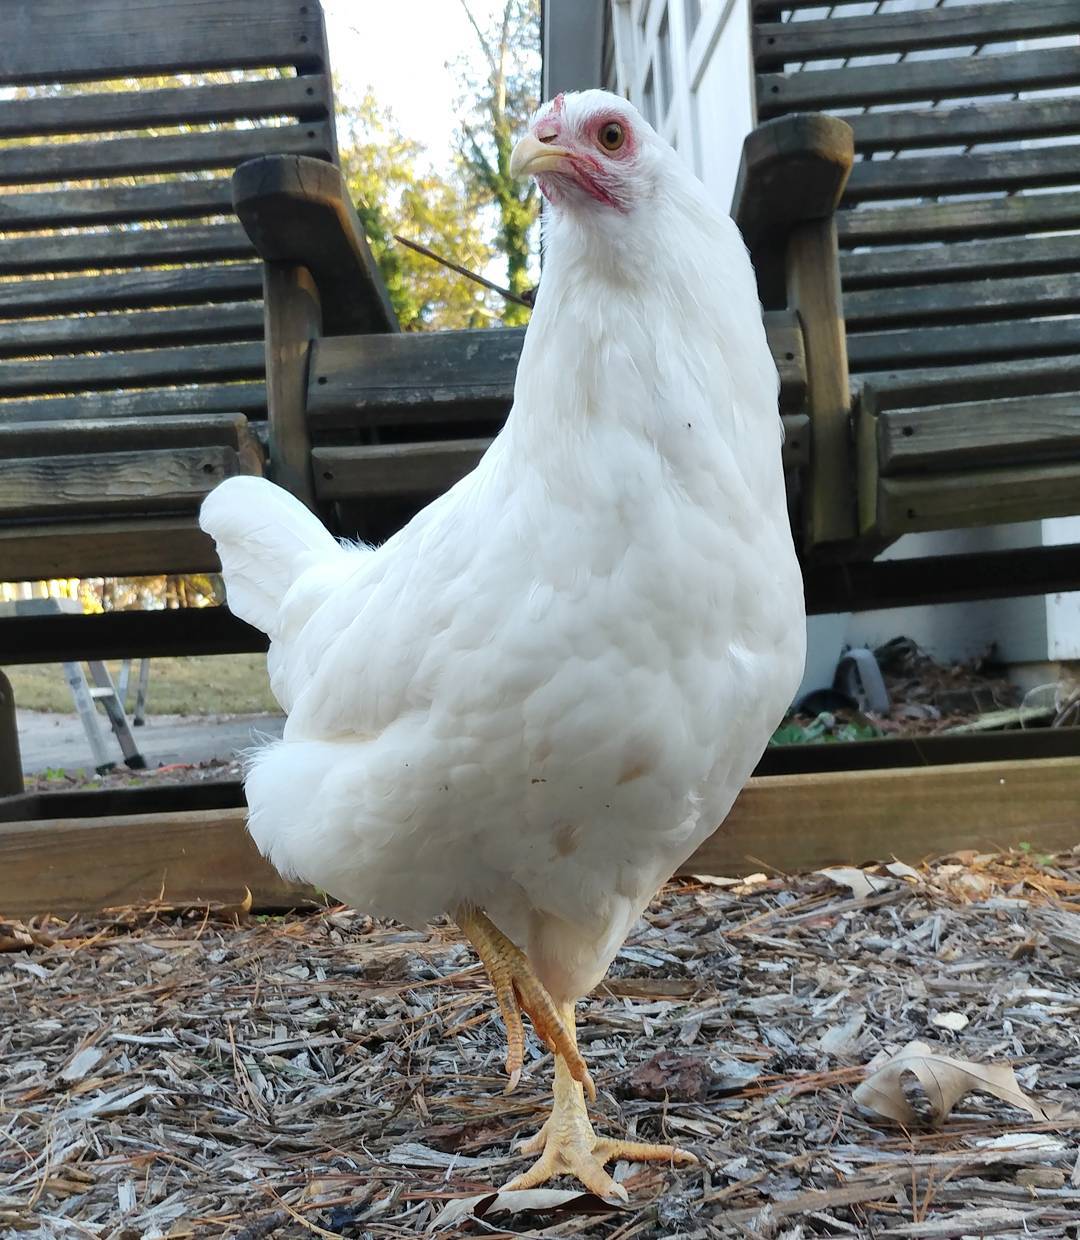 And to think Glo was once a chick that couldn't walk! Look at this powerful hen struting her stuff! (She did break out of the pen and force me to chase her around the yard before posing for this photo. She is a stealth ninja.)